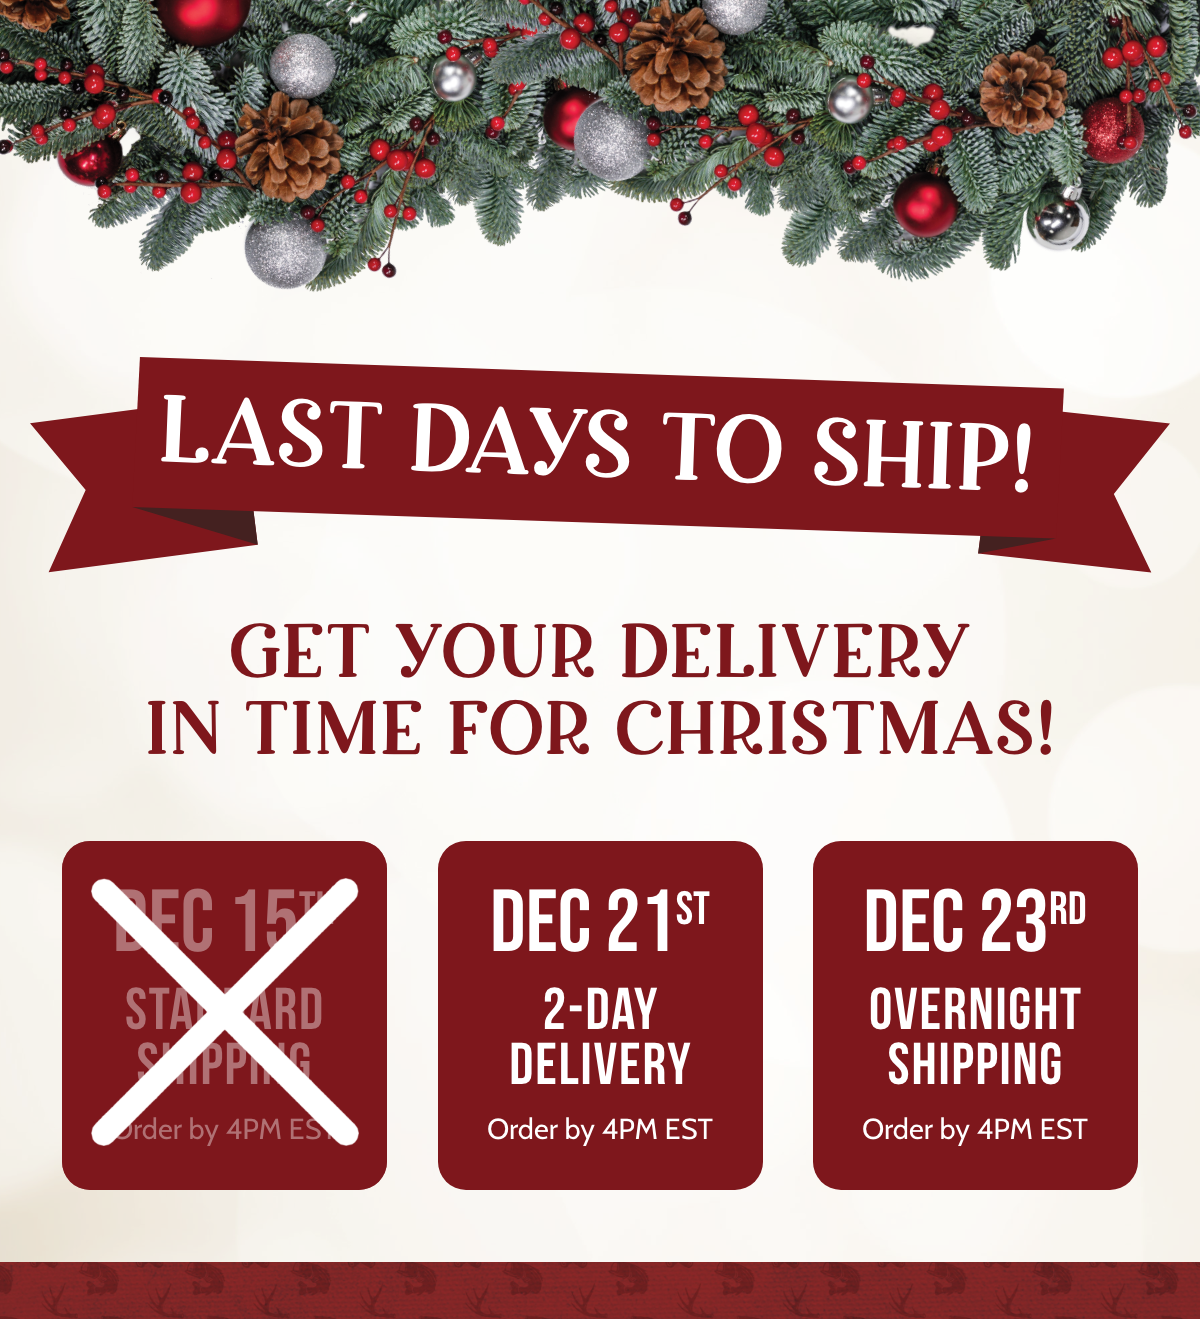 Bass Pro Shops HURRY Last day to get your delivery before Christmas